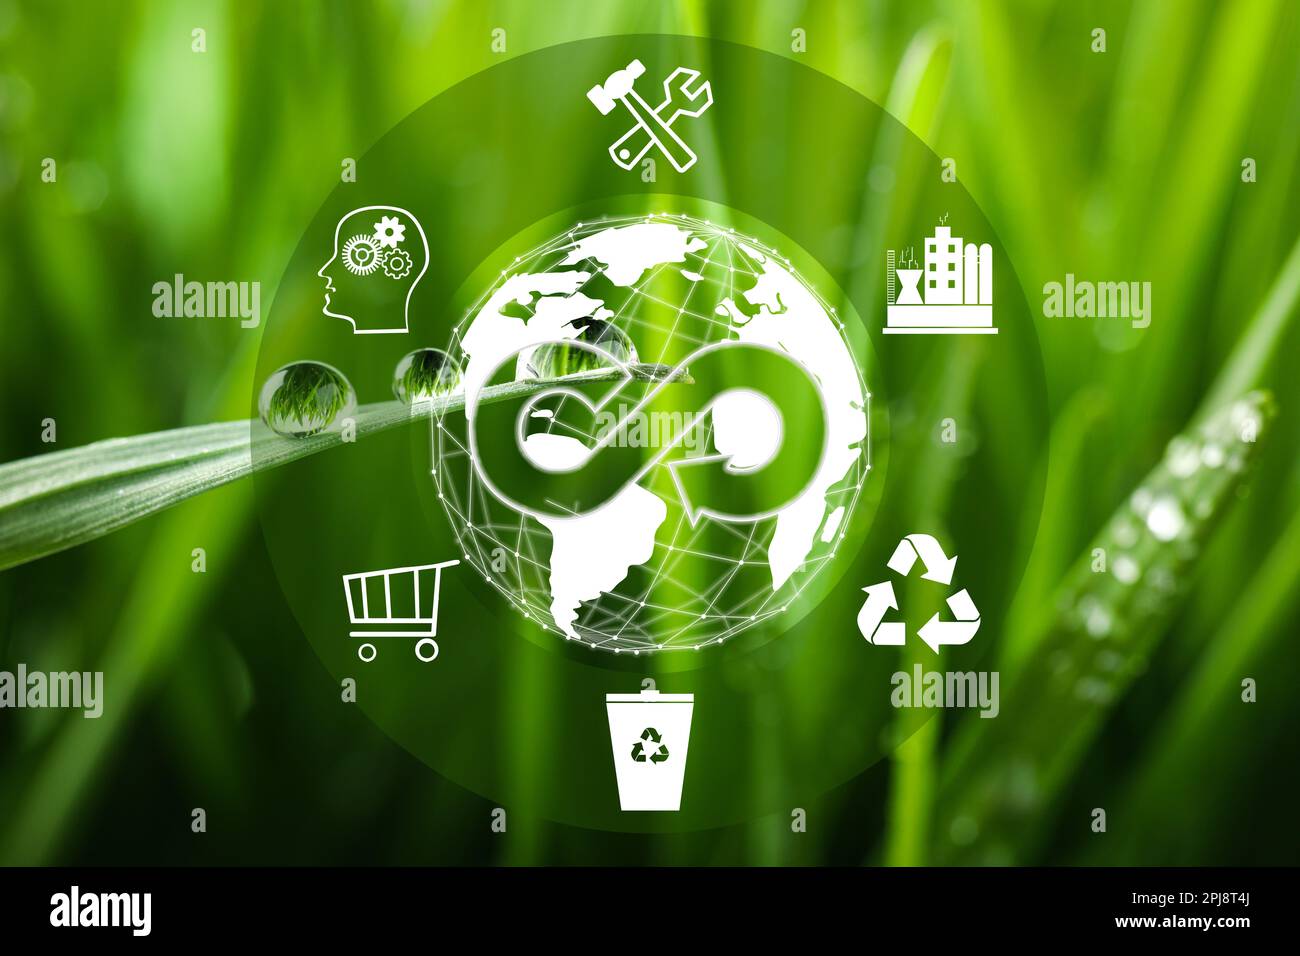 Circular economy concept. Green grass and illustration of infinity symbol and different icons Stock Photo